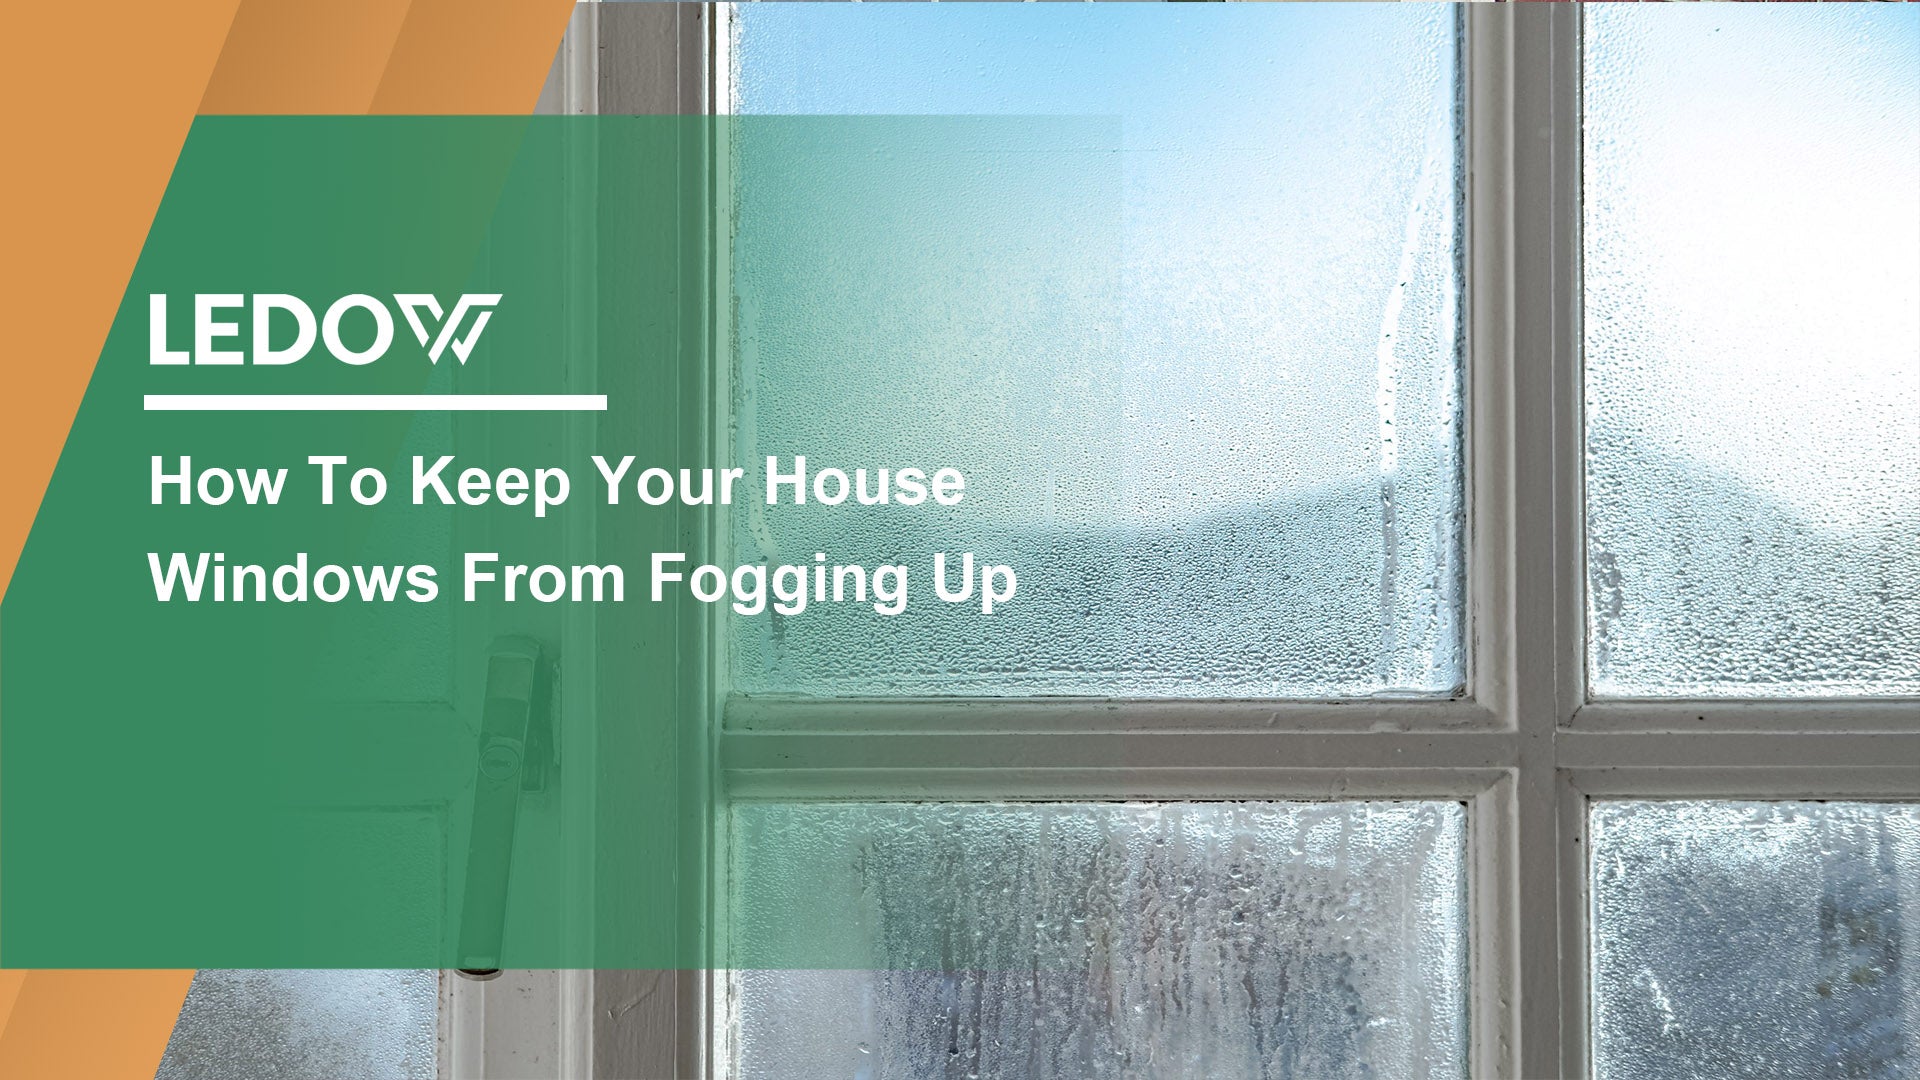 How To Keep Your House Windows From Fogging Up?